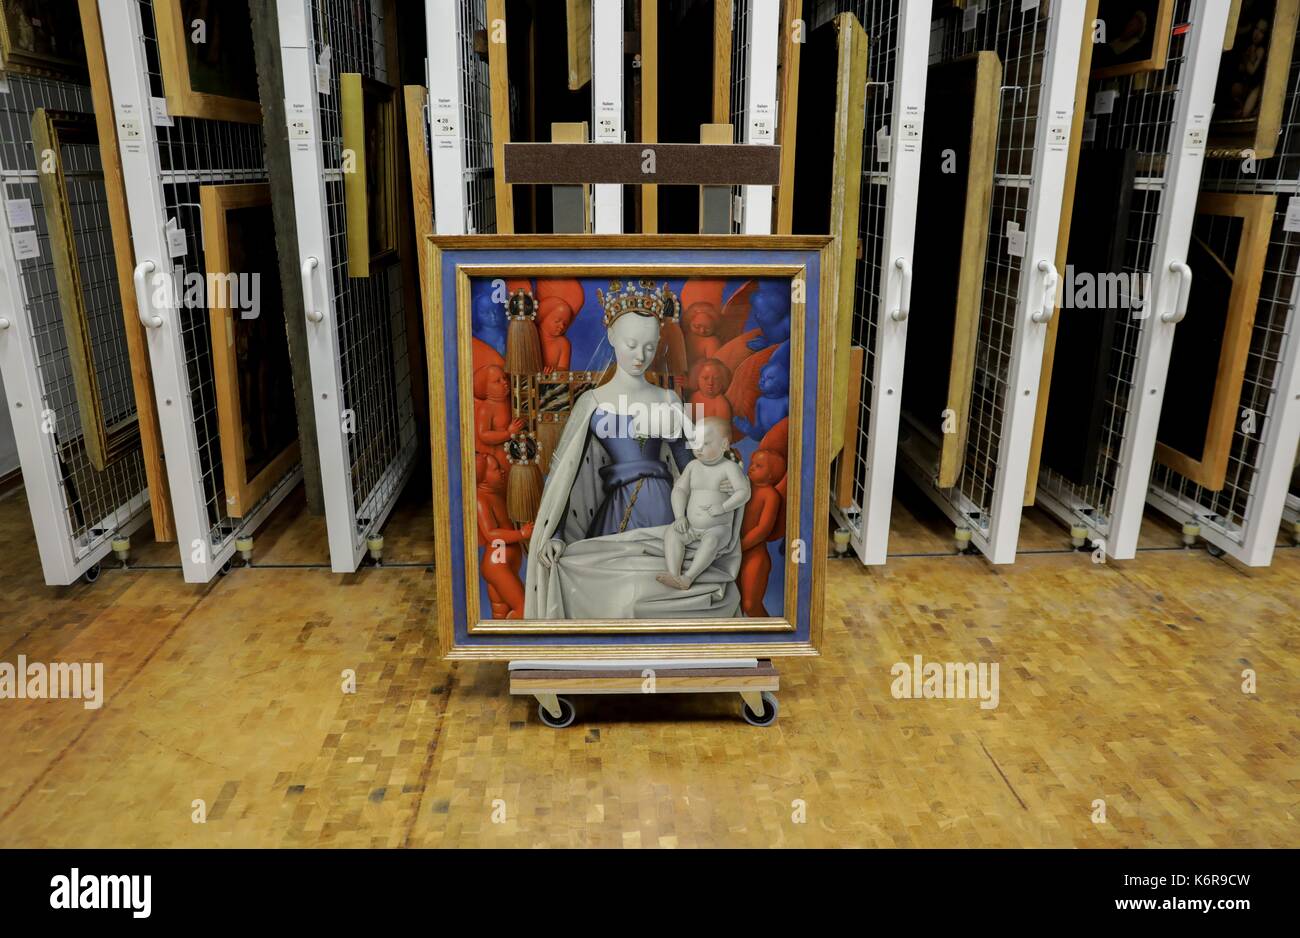 Berlin, Germany. 13th Sep, 2017. The right wing of the Melun Diptych by Jean Fouquet can be see inside the depot of the Gallery of Old Masters in Berlin, Germany, 13 September 2017. The exhibition 'Jean Fouquet. The Melun Diptych' will last from the 15th of September to the 7th of January. Photo: Kay Nietfeld/dpa/Alamy Live News Stock Photo